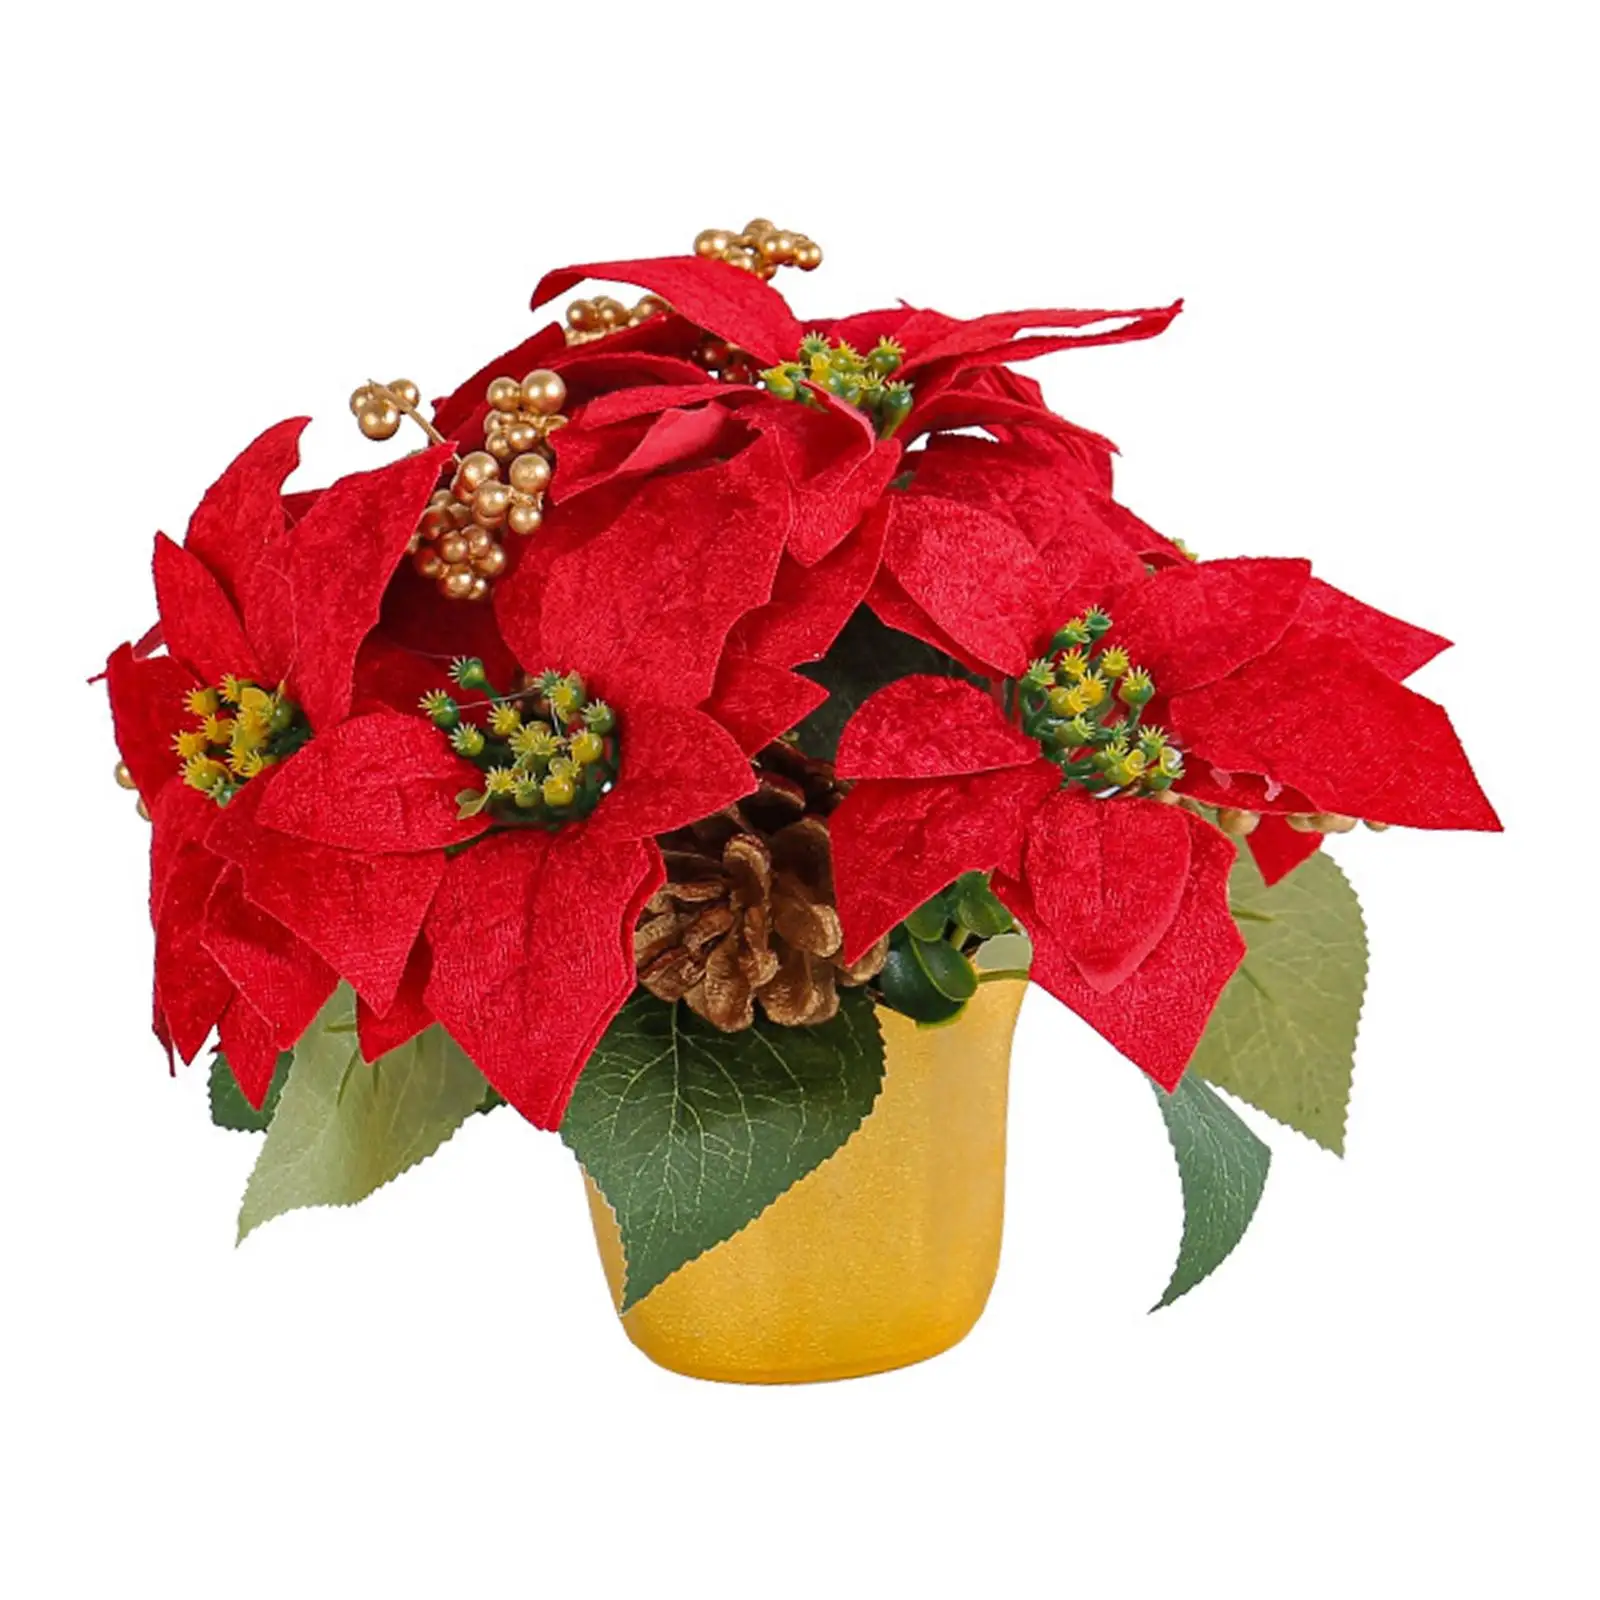 Christmas Artificial Poinsettia Plant Potted Red Poinsettia Decorative Artificial Flower for Holiday Xmas Garden Tabletop Indoor